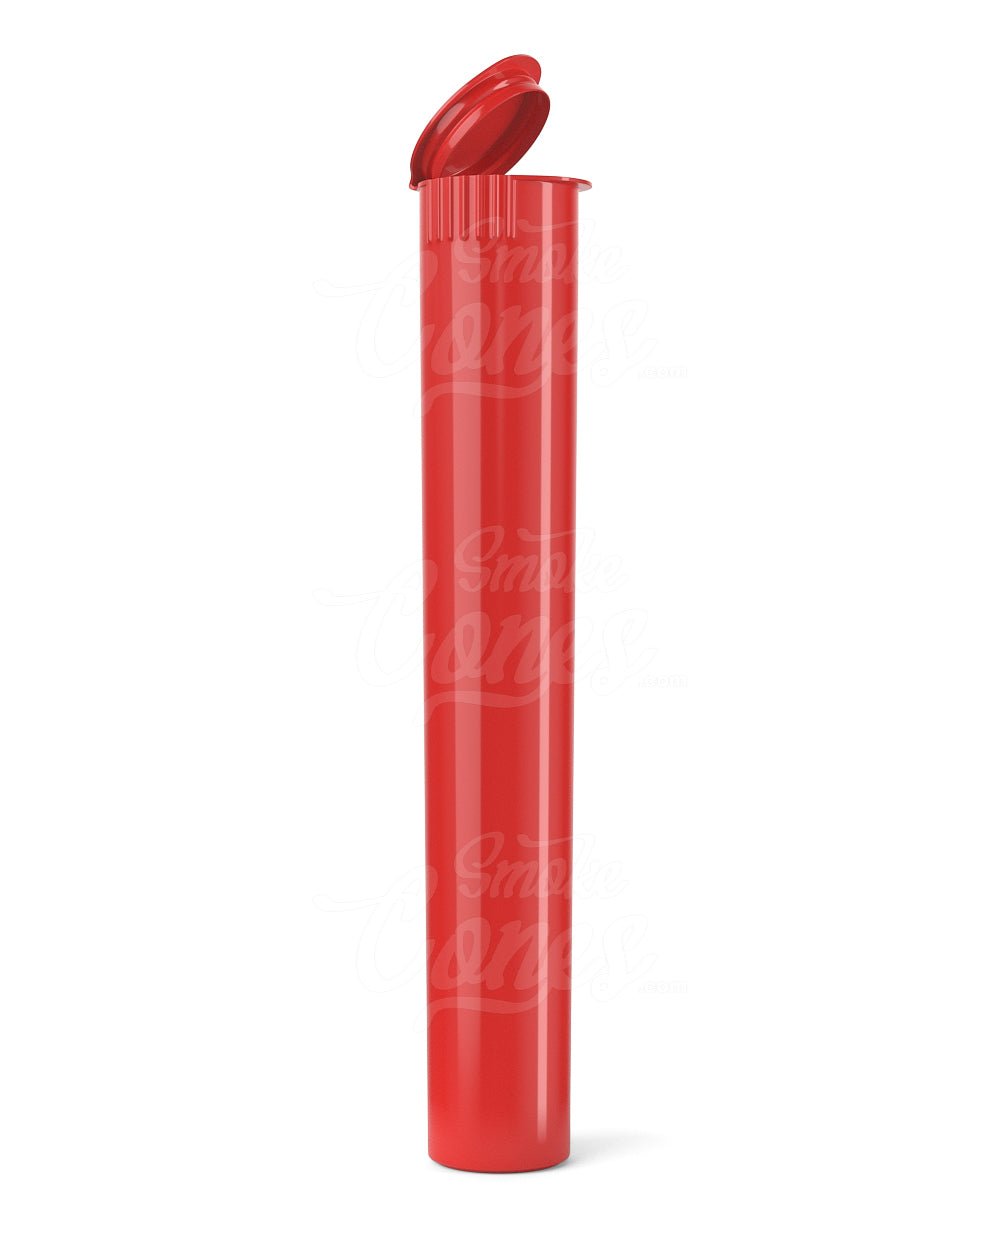 116mm Child Resistant King Size Biodegradable Pop Top Opaque Red Plastic Open Cone Pre-Roll Tubes 1000/Box - 1